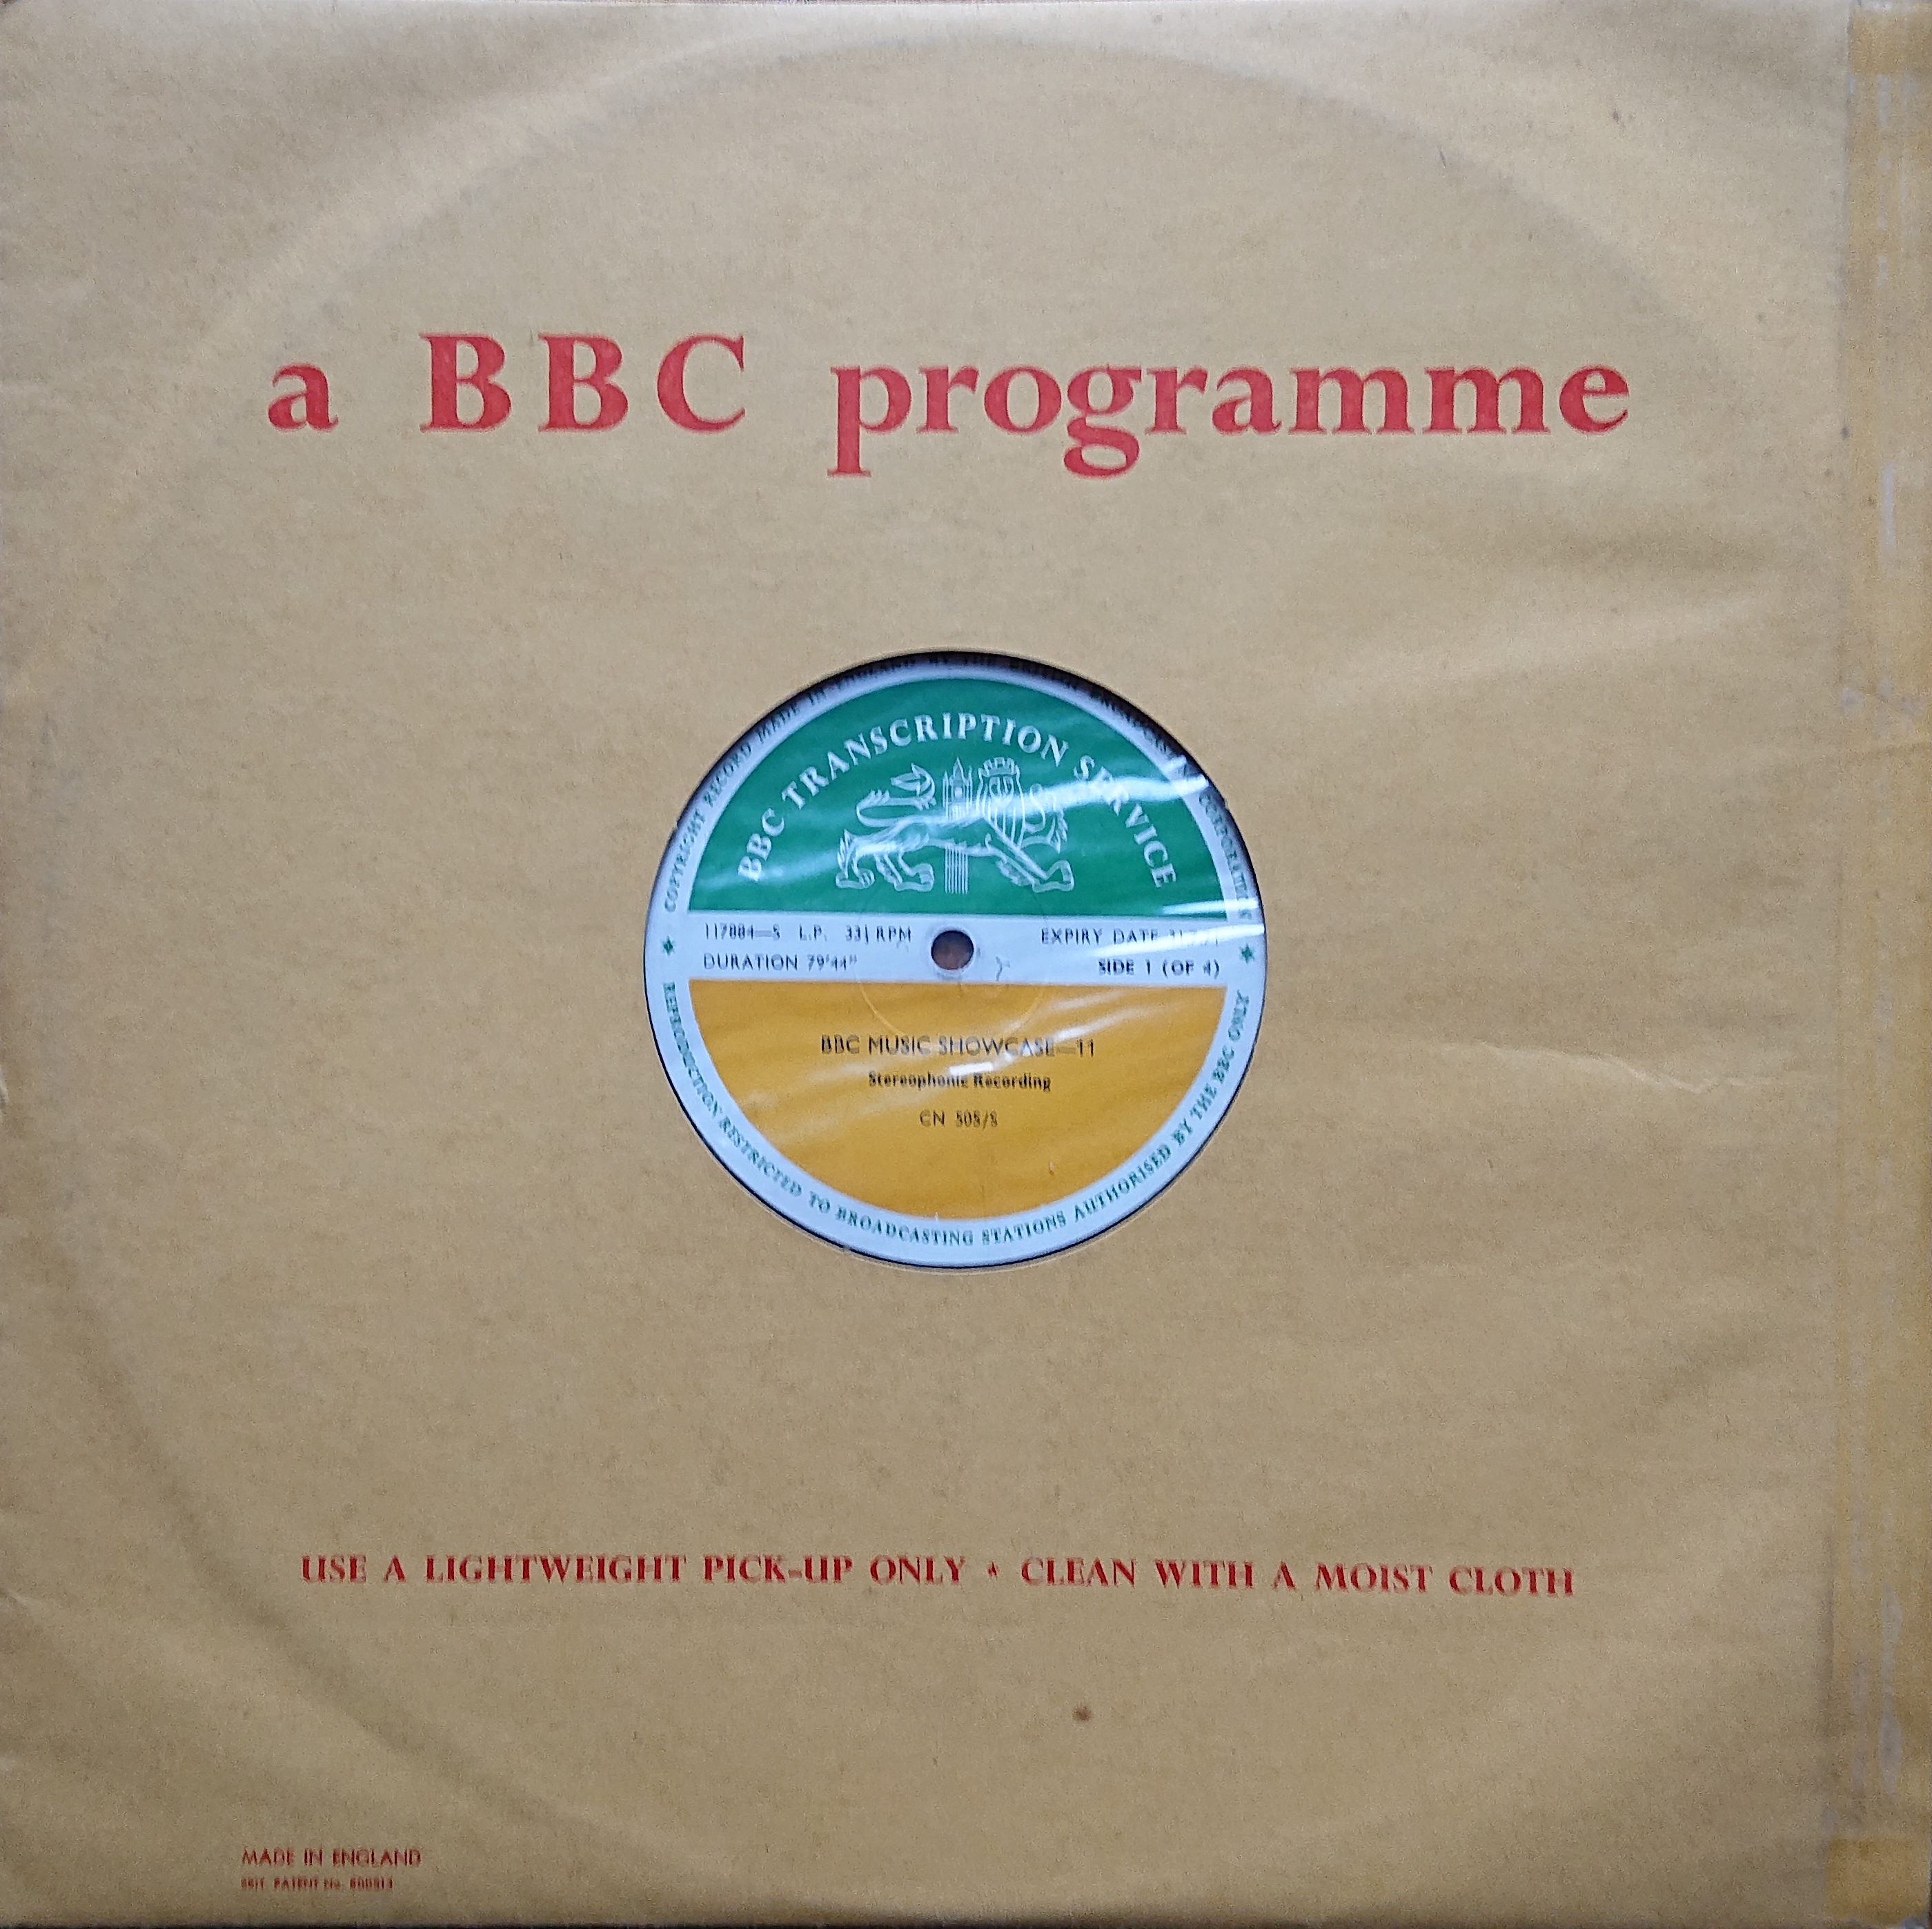 Picture of CN 505 S 21 BBC music showcase - 11 (Sides 1 & 3) by artist Various from the BBC albums - Records and Tapes library